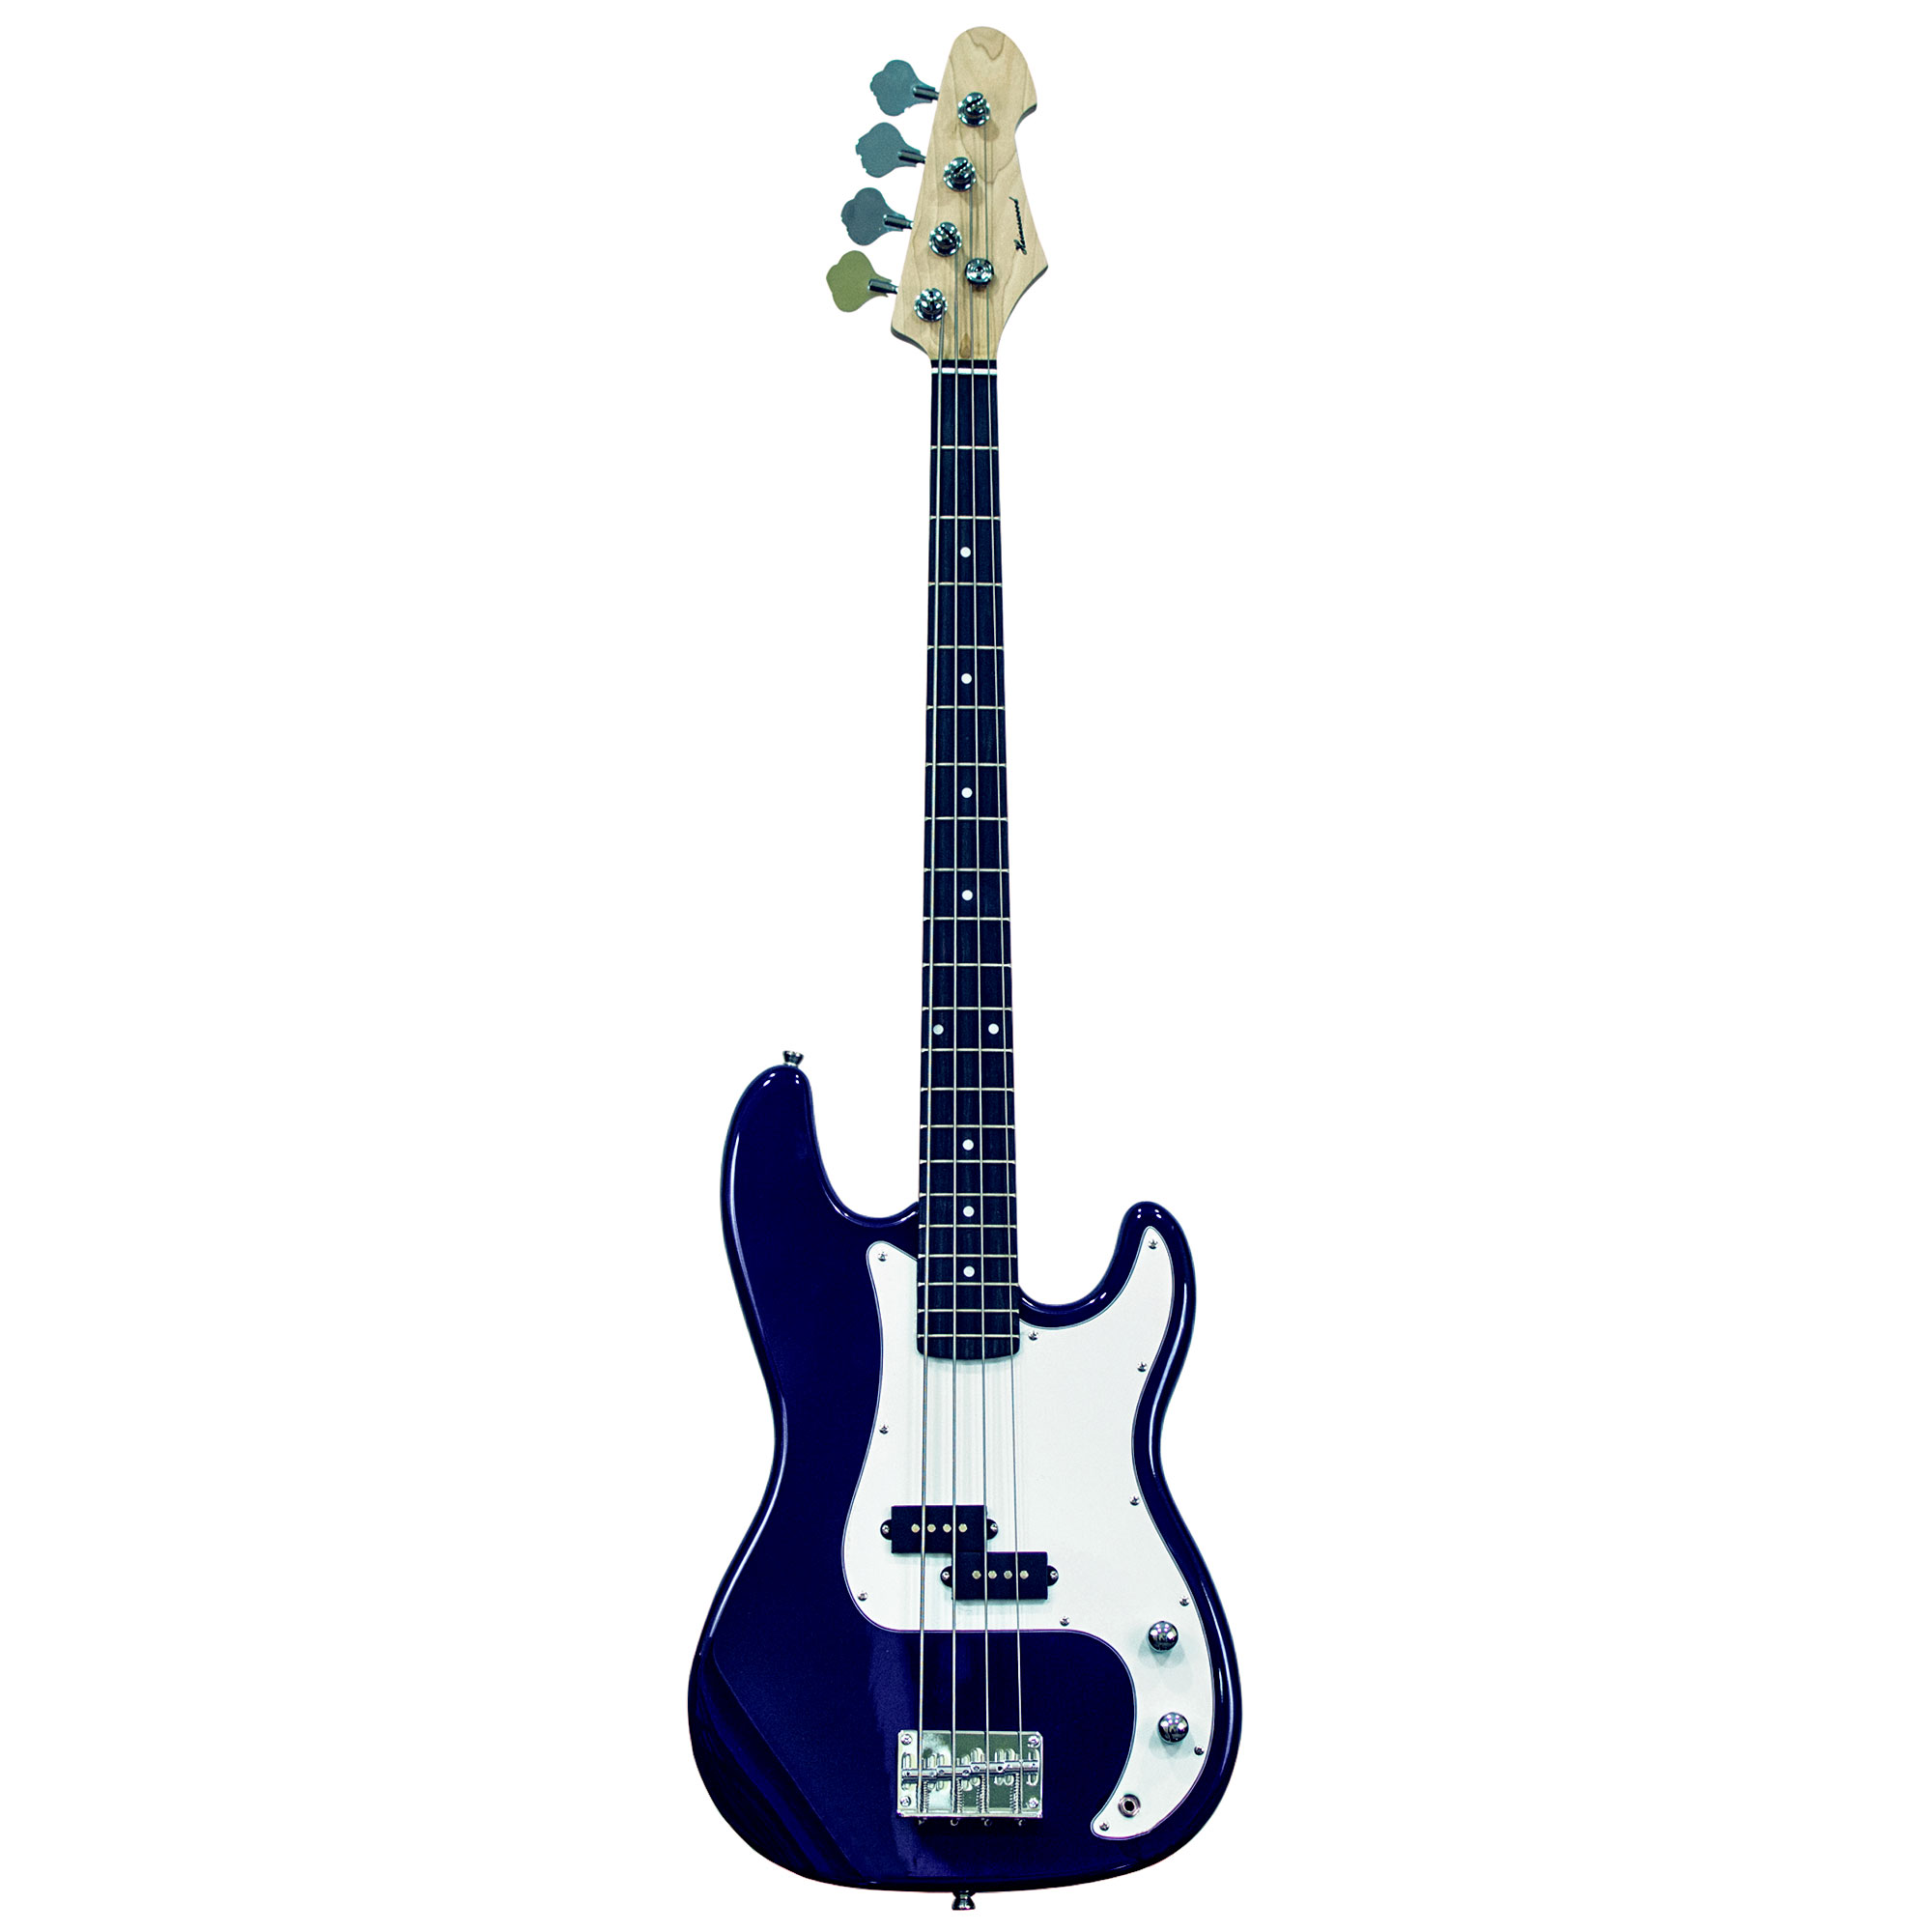 Haineswood Precision PB400-BL Electric 4 String Bass (Blue)